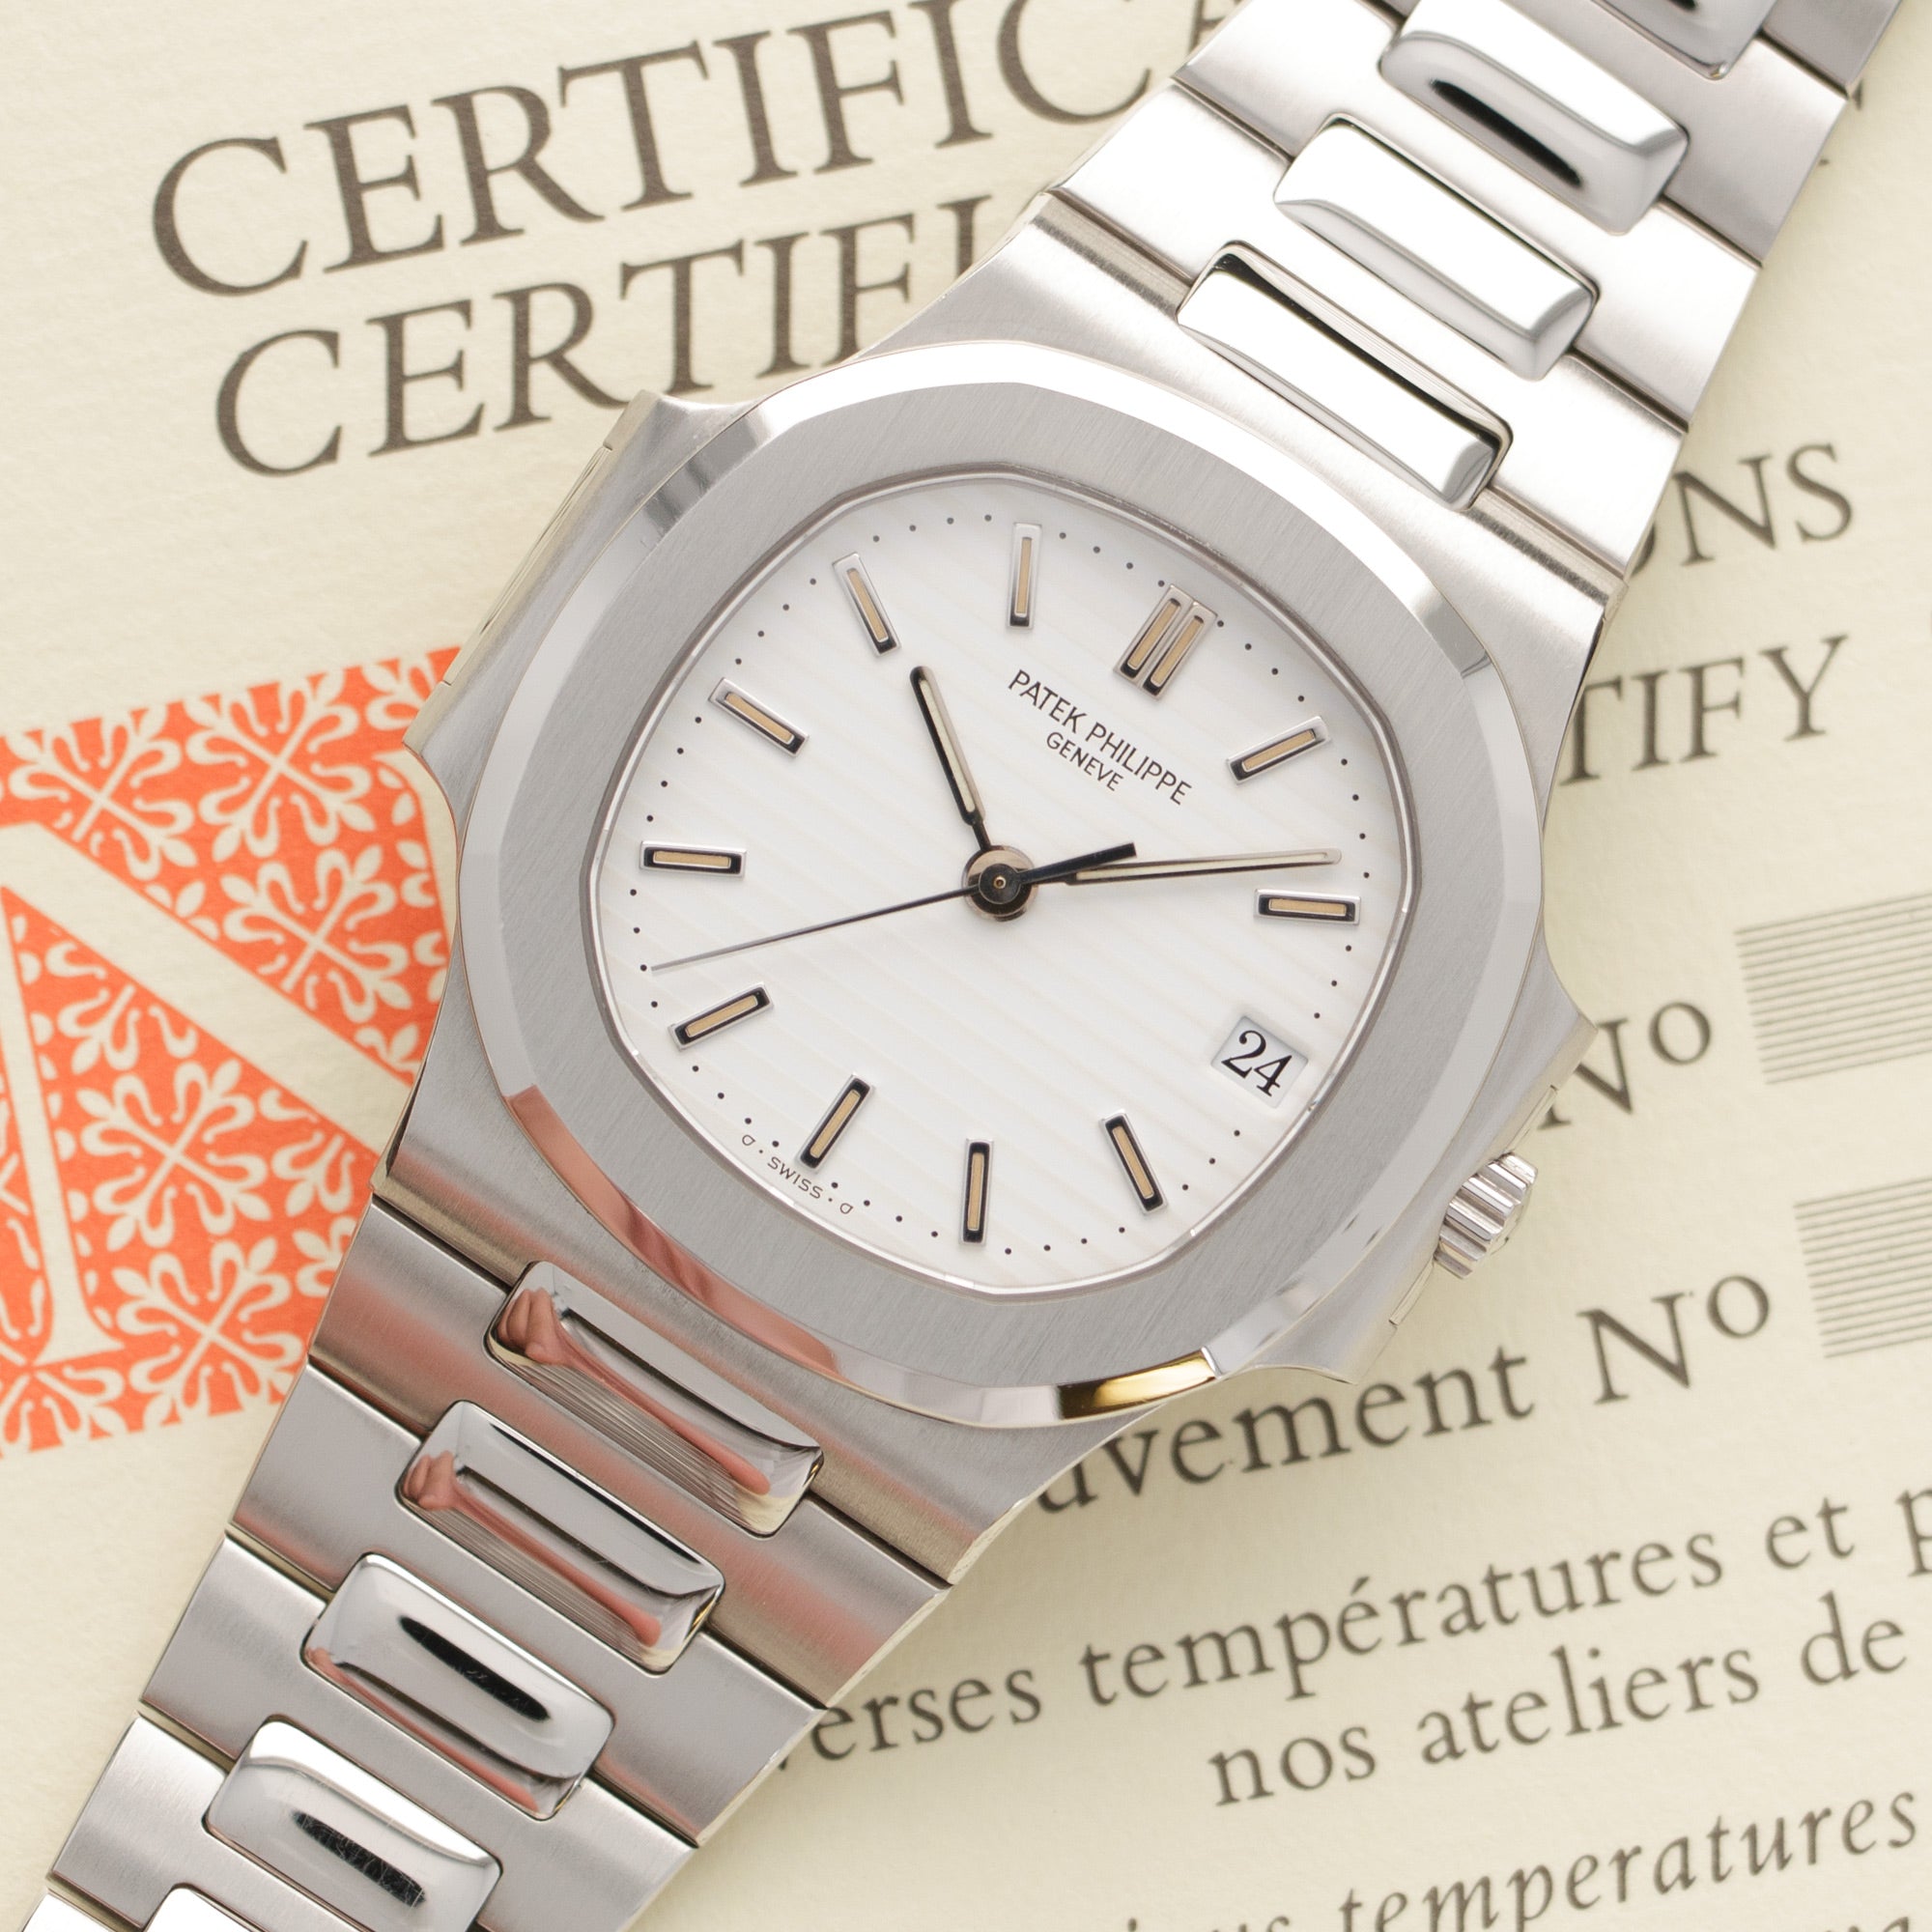 Patek Philippe - Patek Philippe Nautilus Watch Ref. 3800, with Original Box and Papers - The Keystone Watches